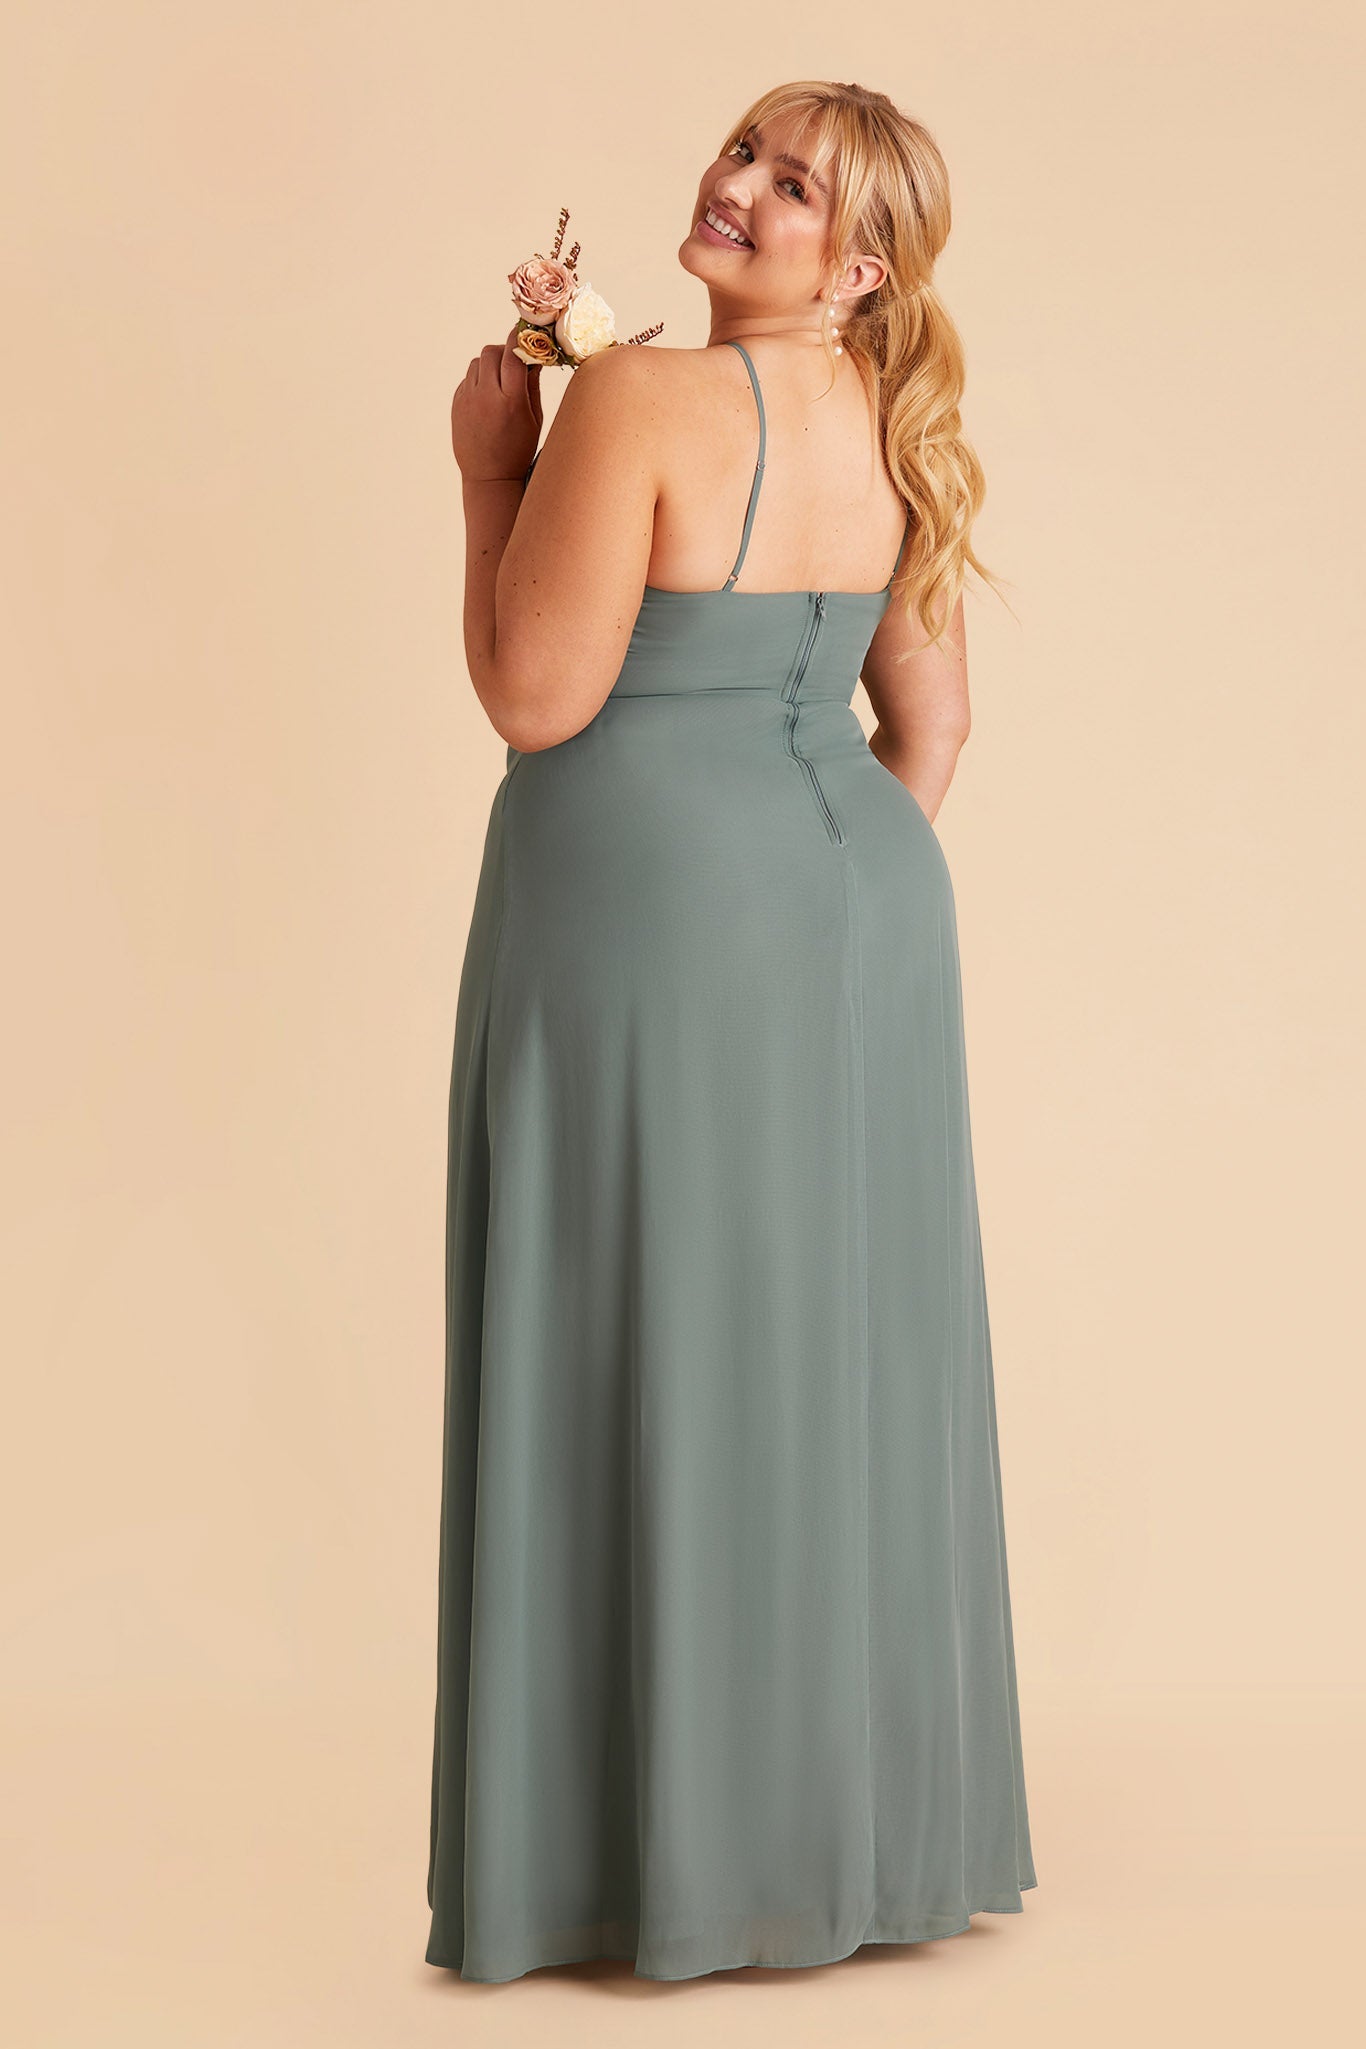 Juliet plus size bridesmaid dress with slit in sea glass chiffon by Birdy Grey, side view